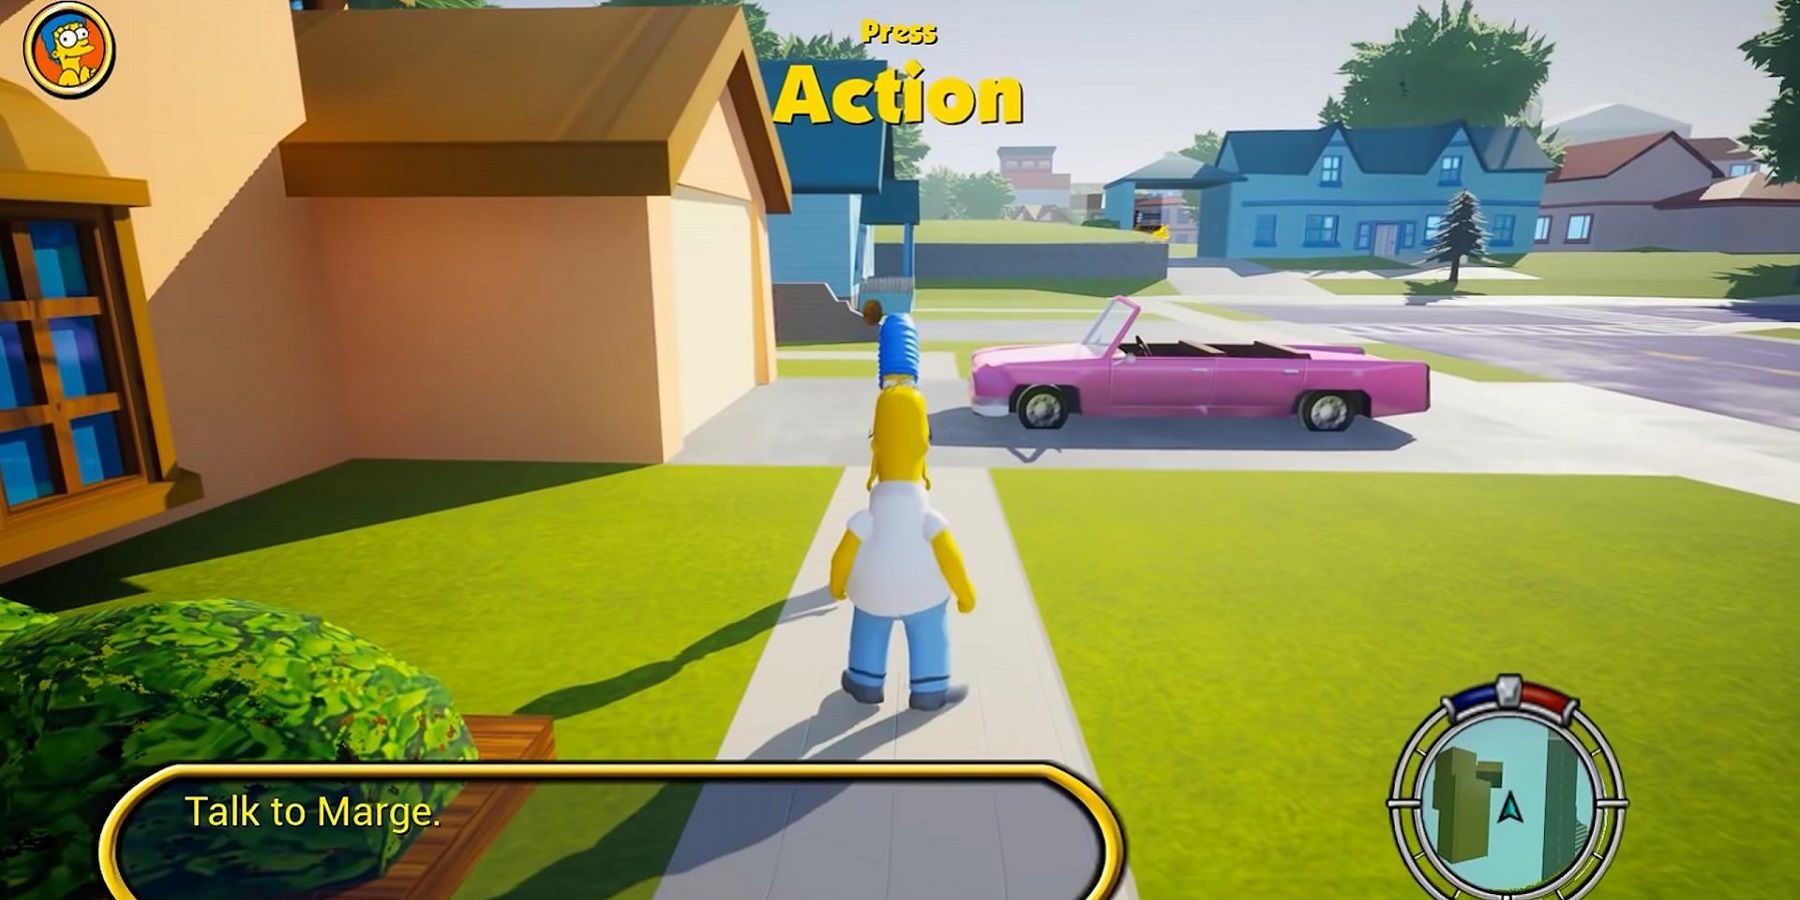 Screenshot from The Simpsons: Hit and Run fan-made remaster showing Homer approaching Marge in the driveway.